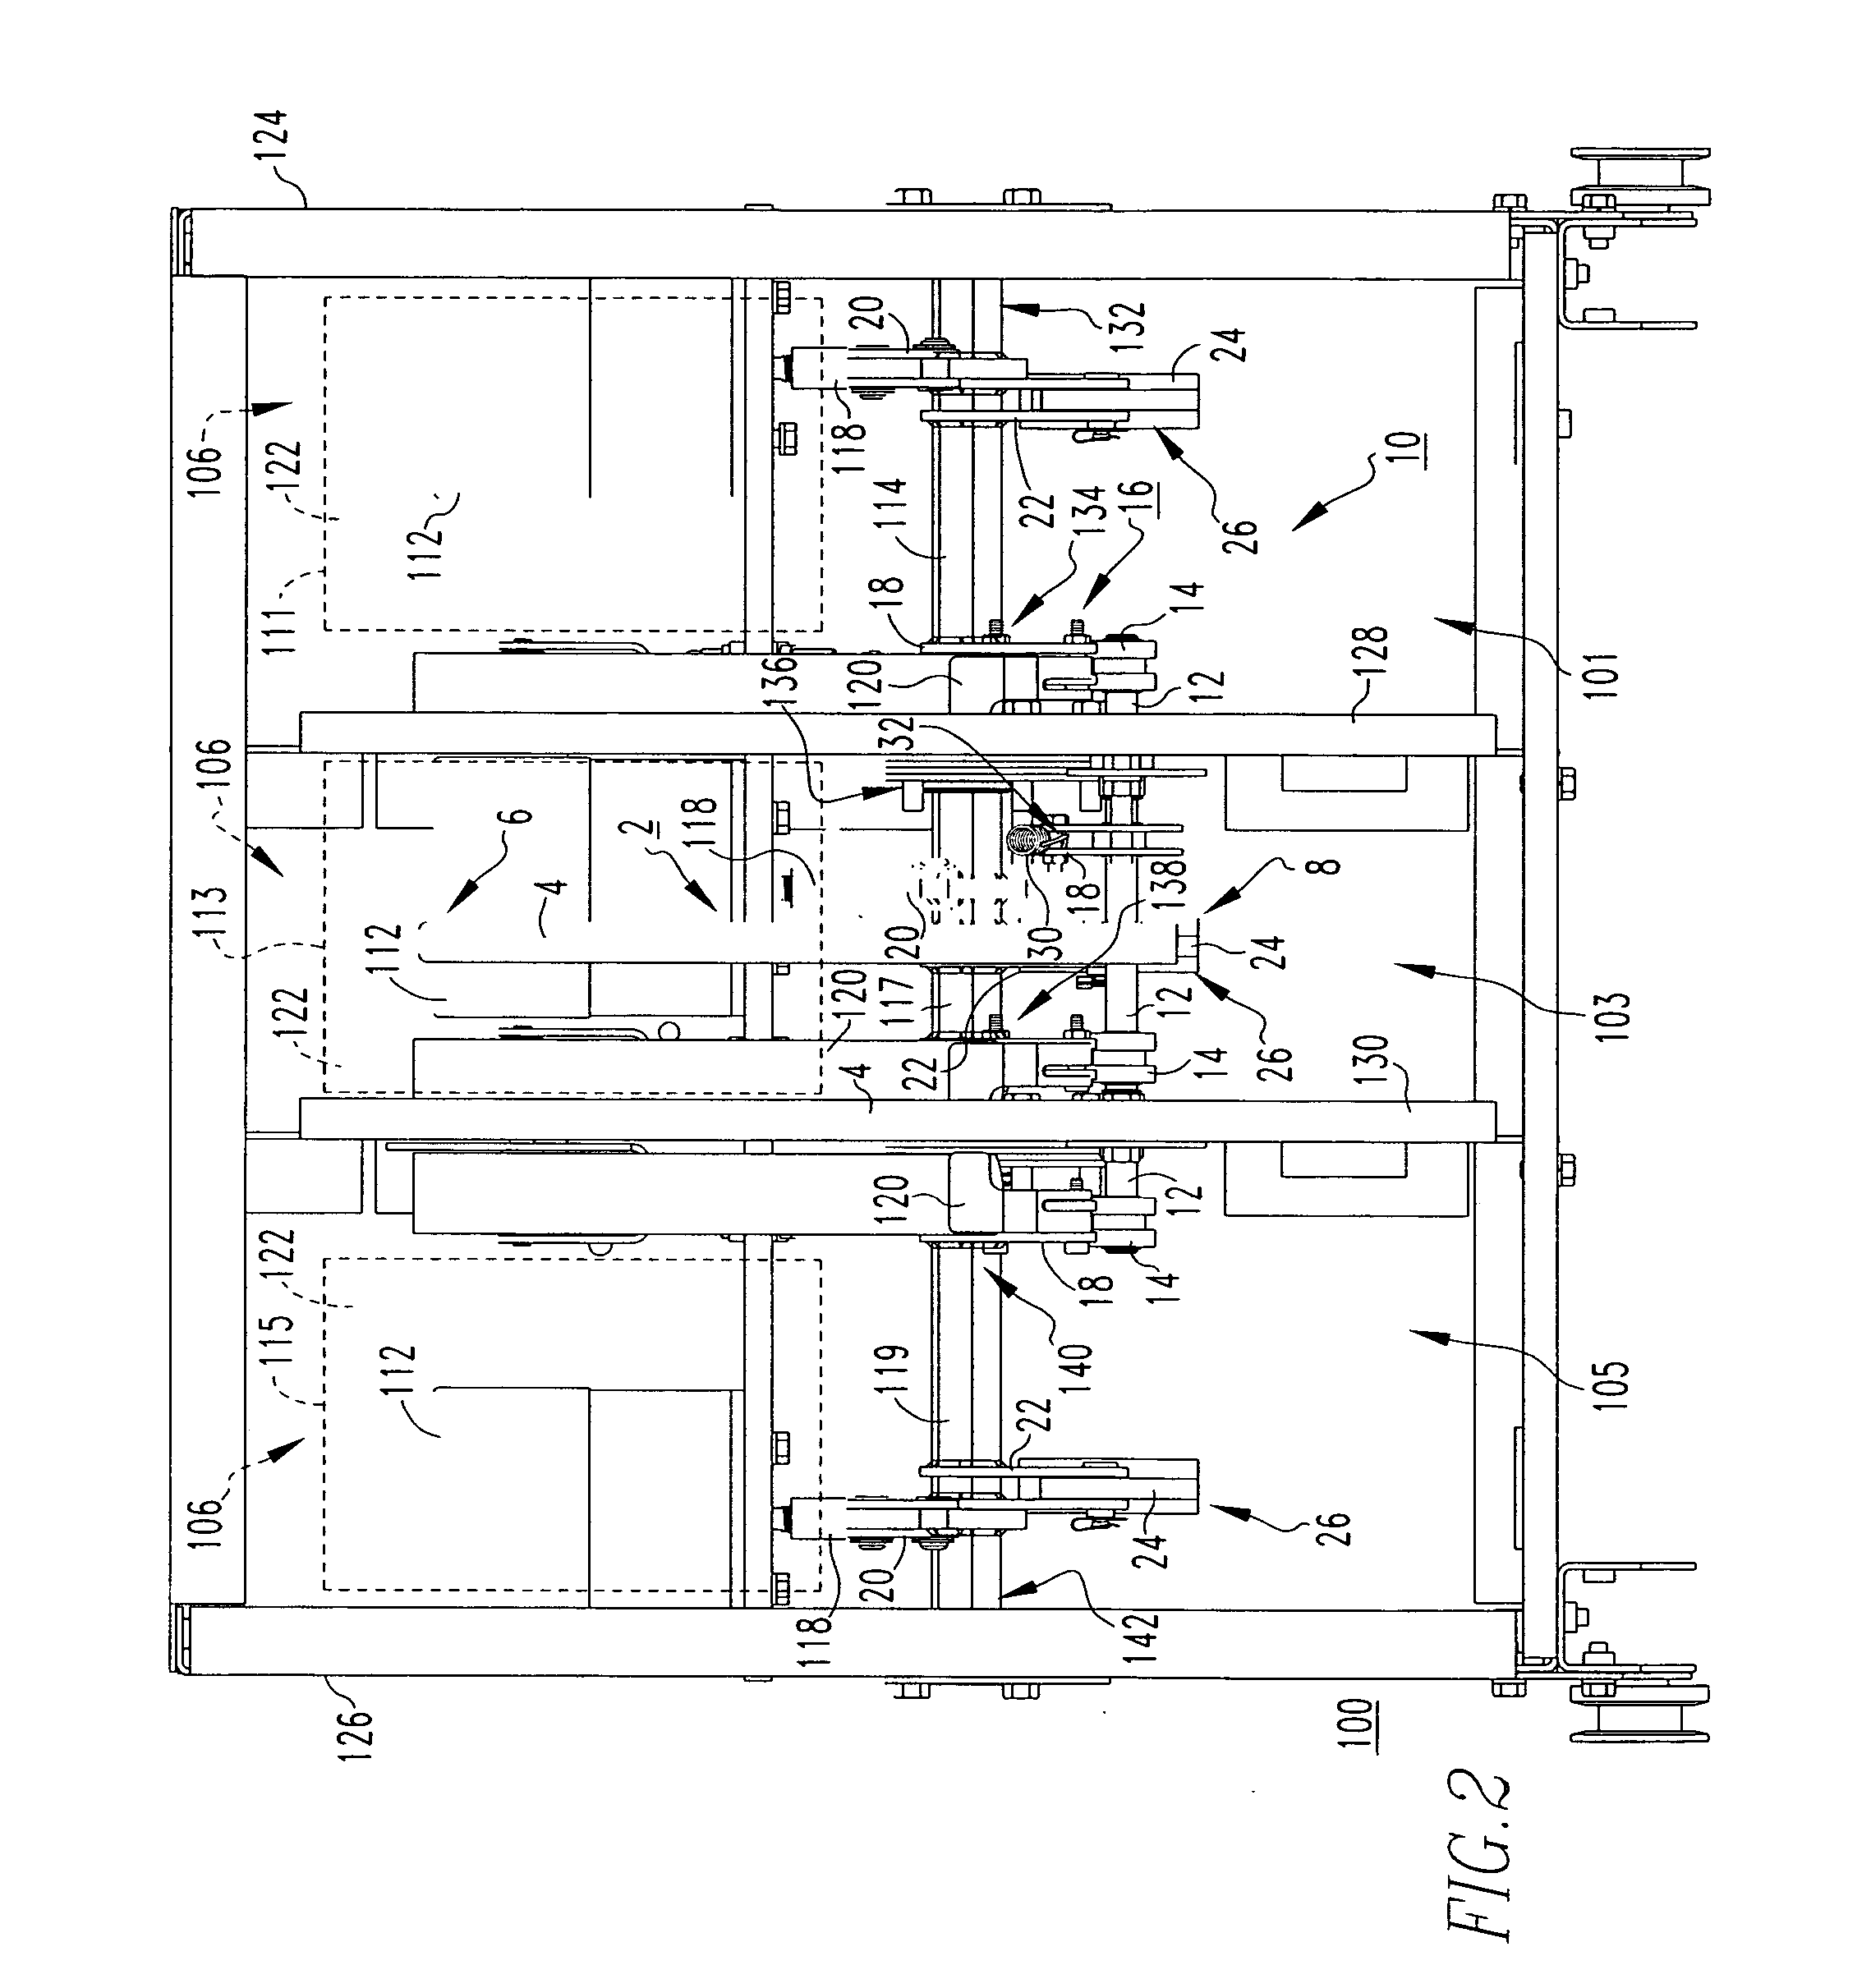 Manual opening device and electrical switching apparatus employing the same